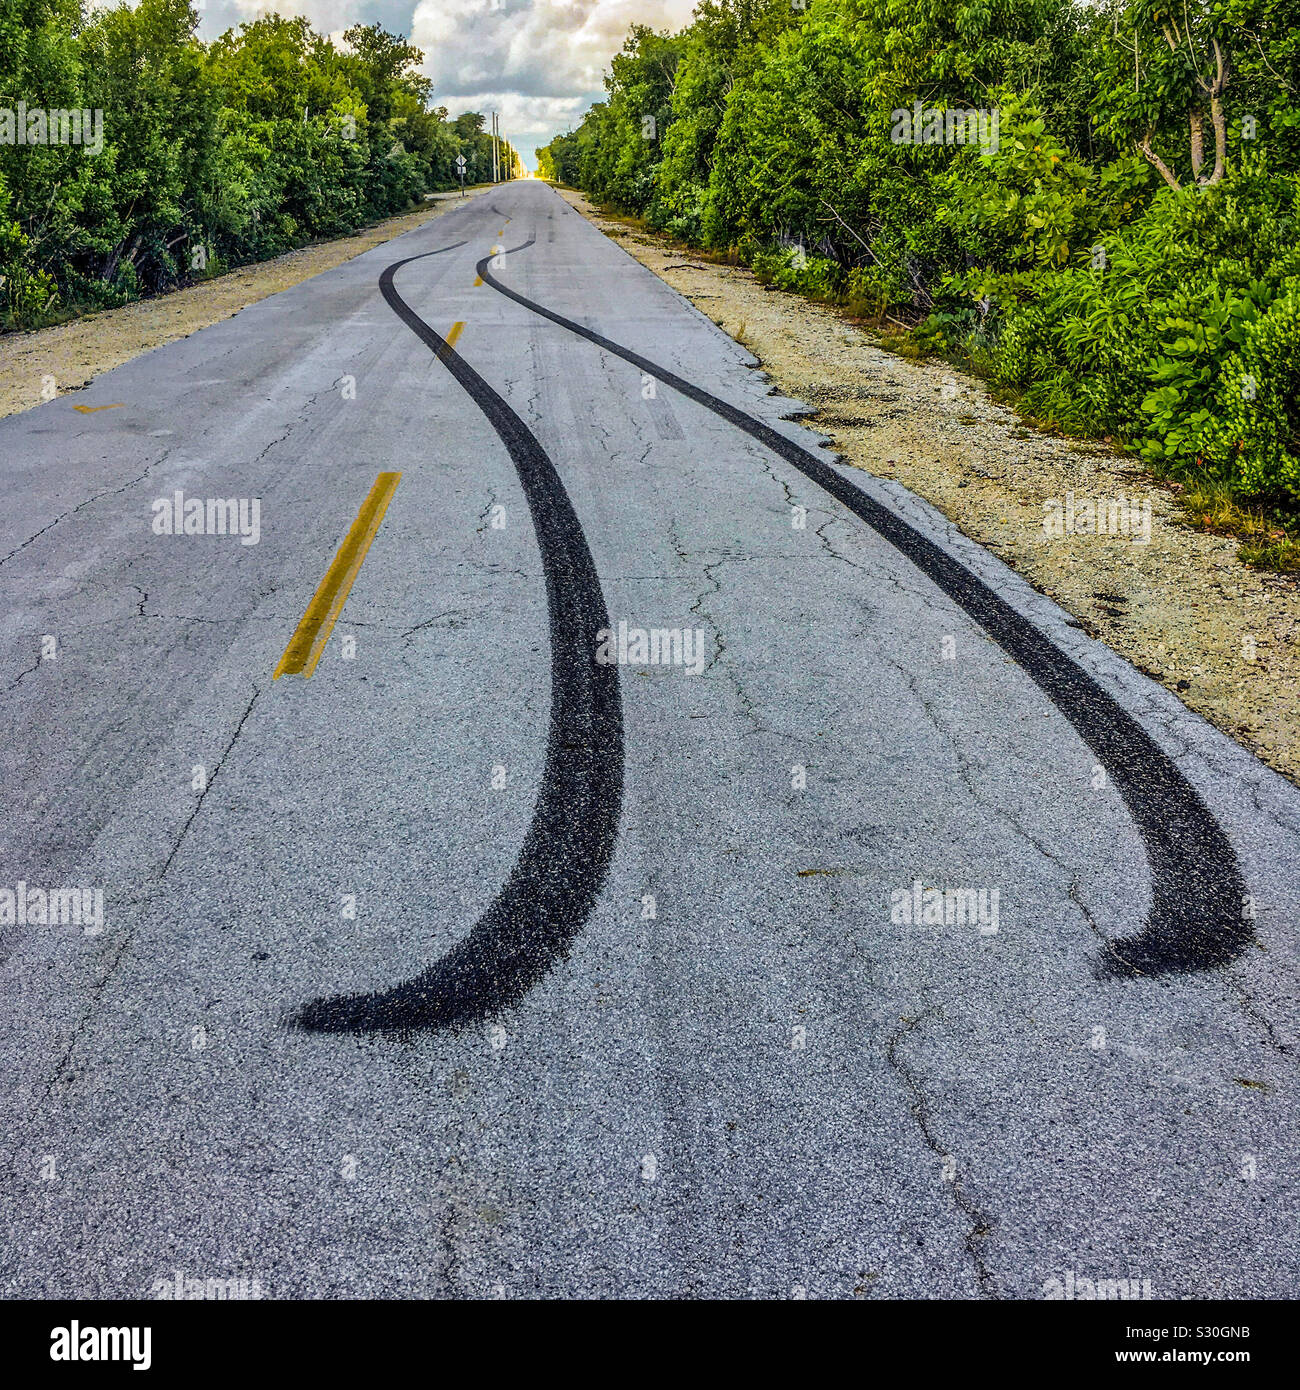 Skid marks Skidmarks at the end of a road, No Name Key, Florida, USA Stock  Photo - Alamy